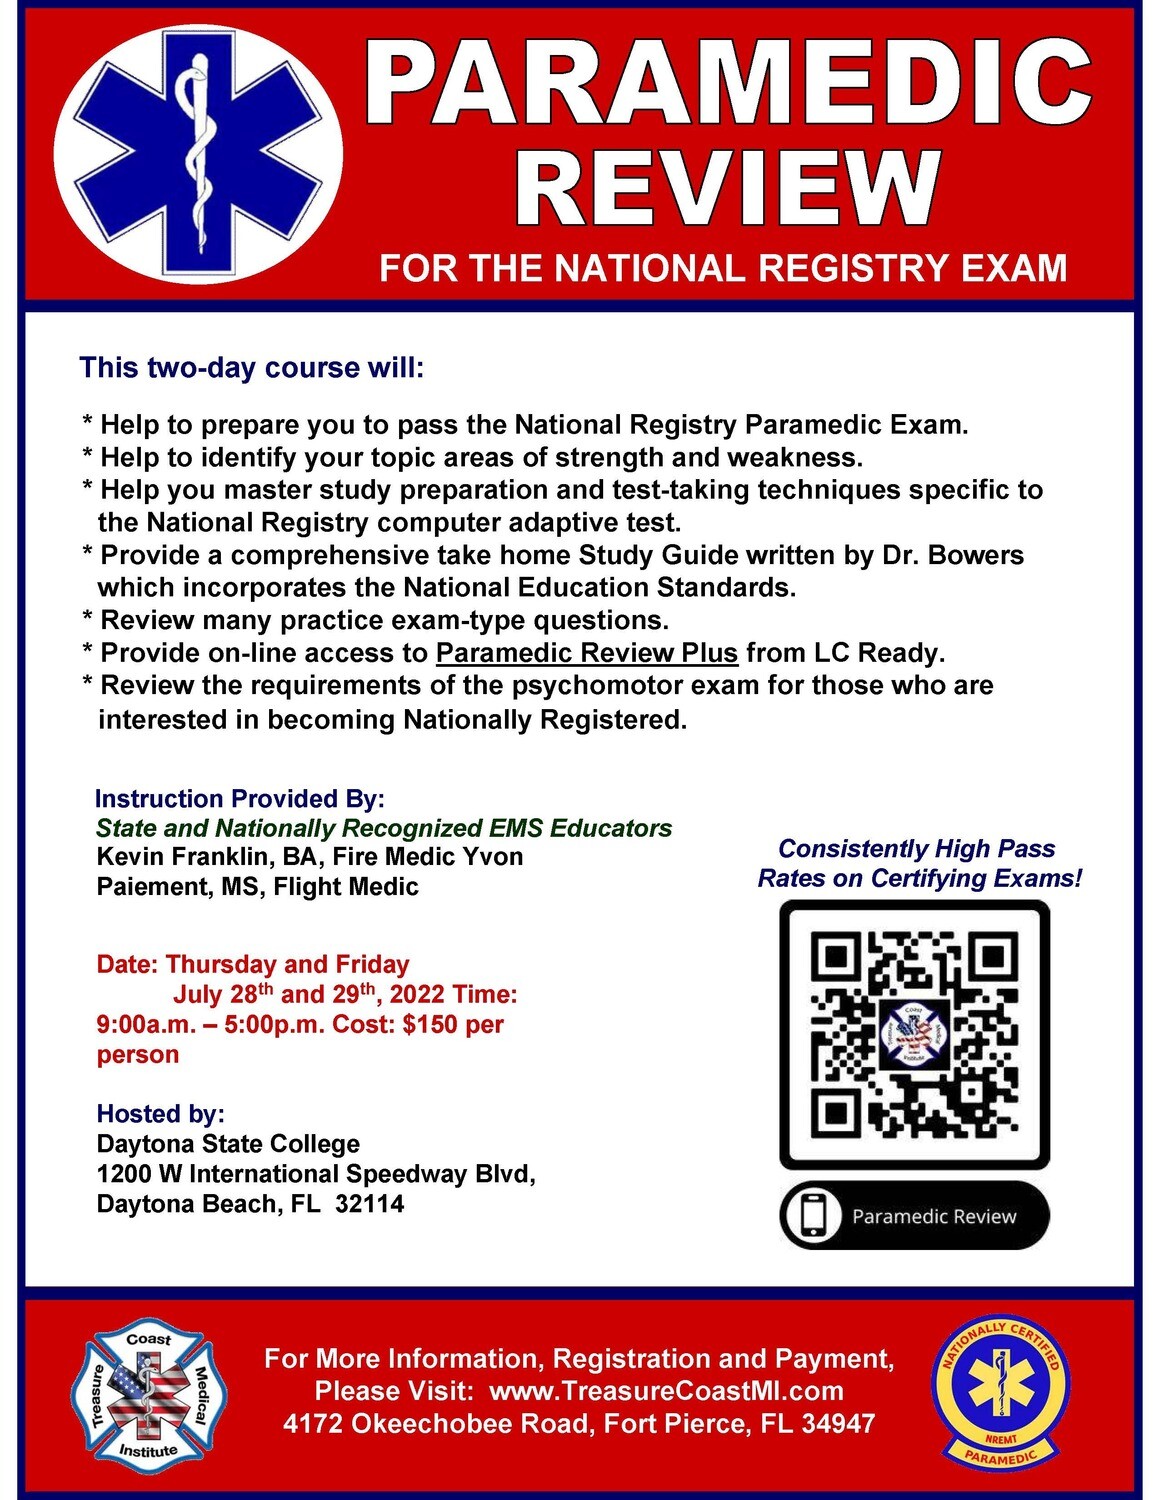 National Registry Paramedic Exam Review July 28th and 29th Daytona State